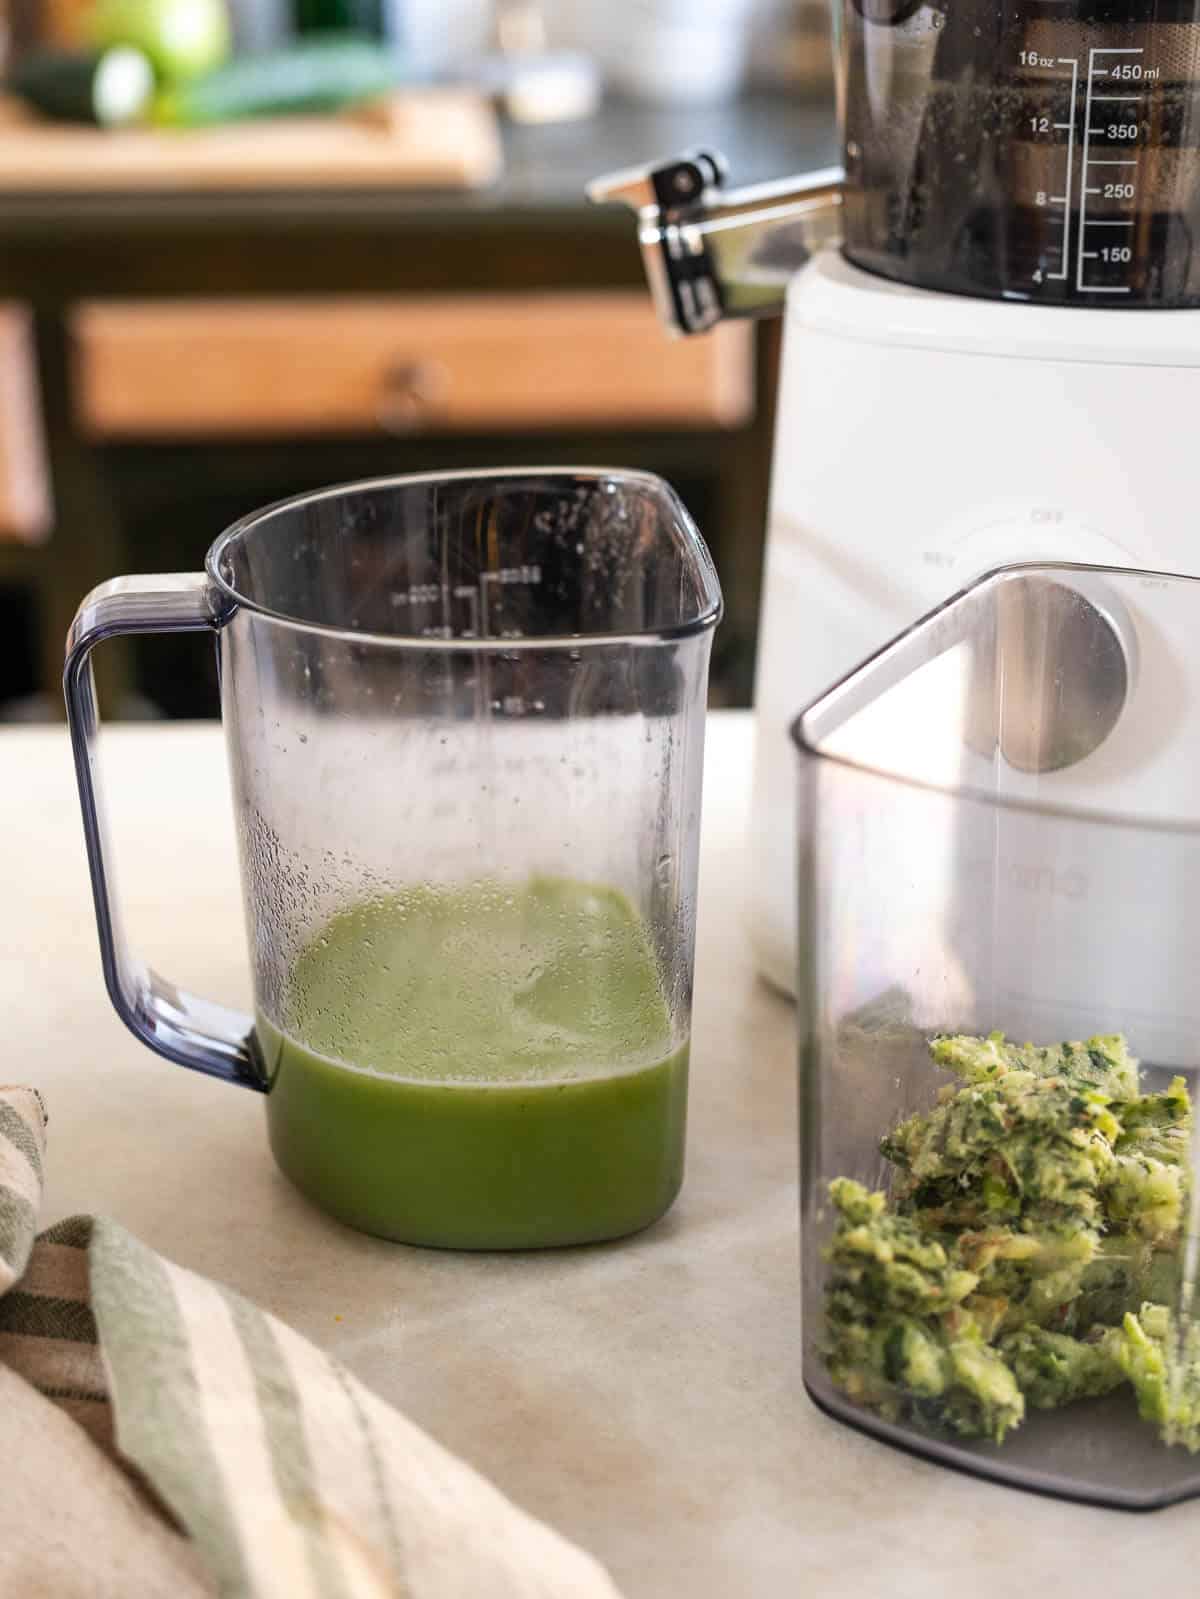 one container with green juice and another with the juice pulp.